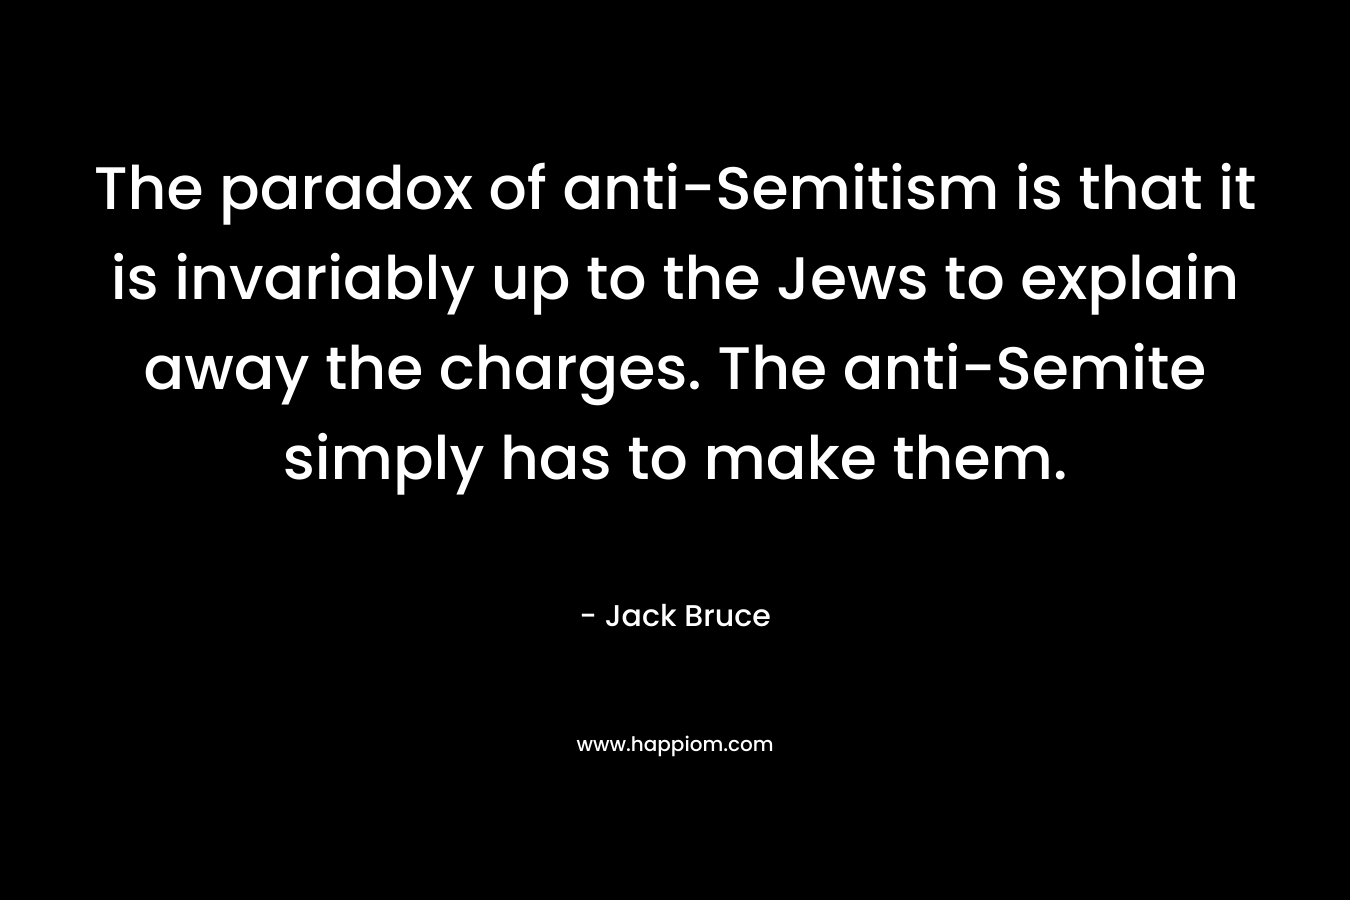 The paradox of anti-Semitism is that it is invariably up to the Jews to explain away the charges. The anti-Semite simply has to make them.